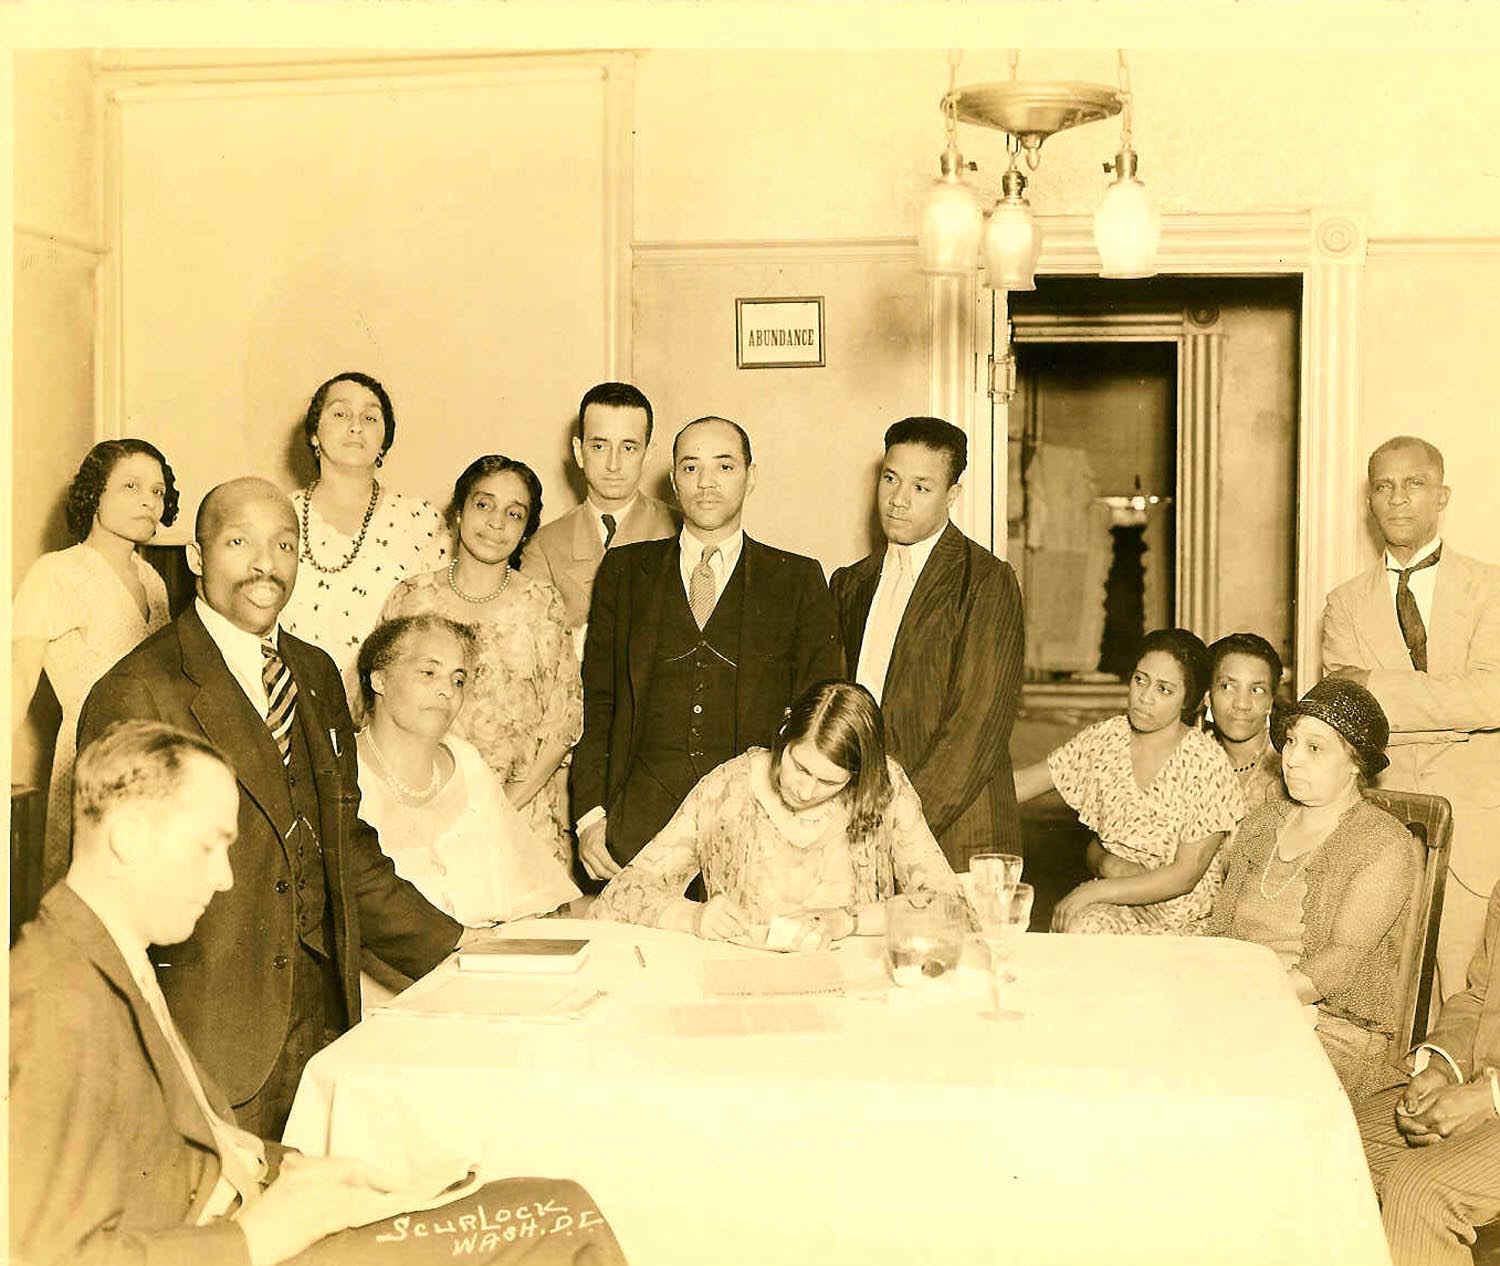 An early photo of FATHER DIVINE with a group